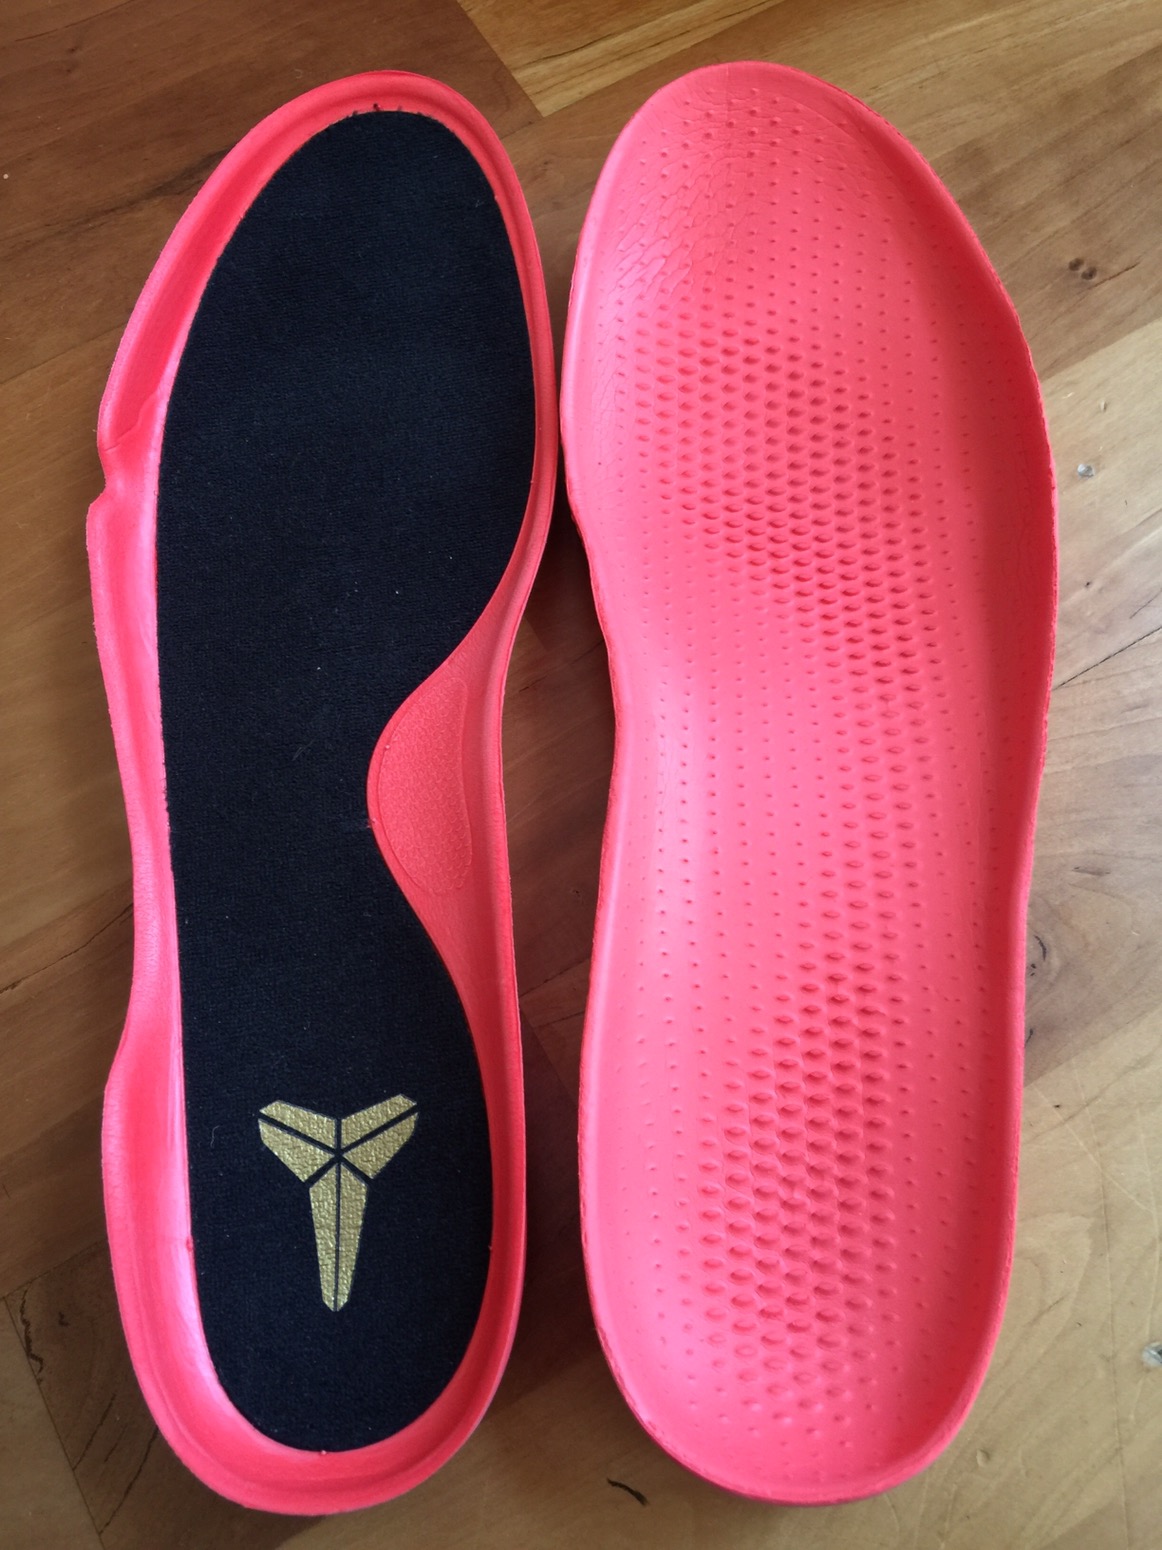 kobe 11 full length zoom insole for sale